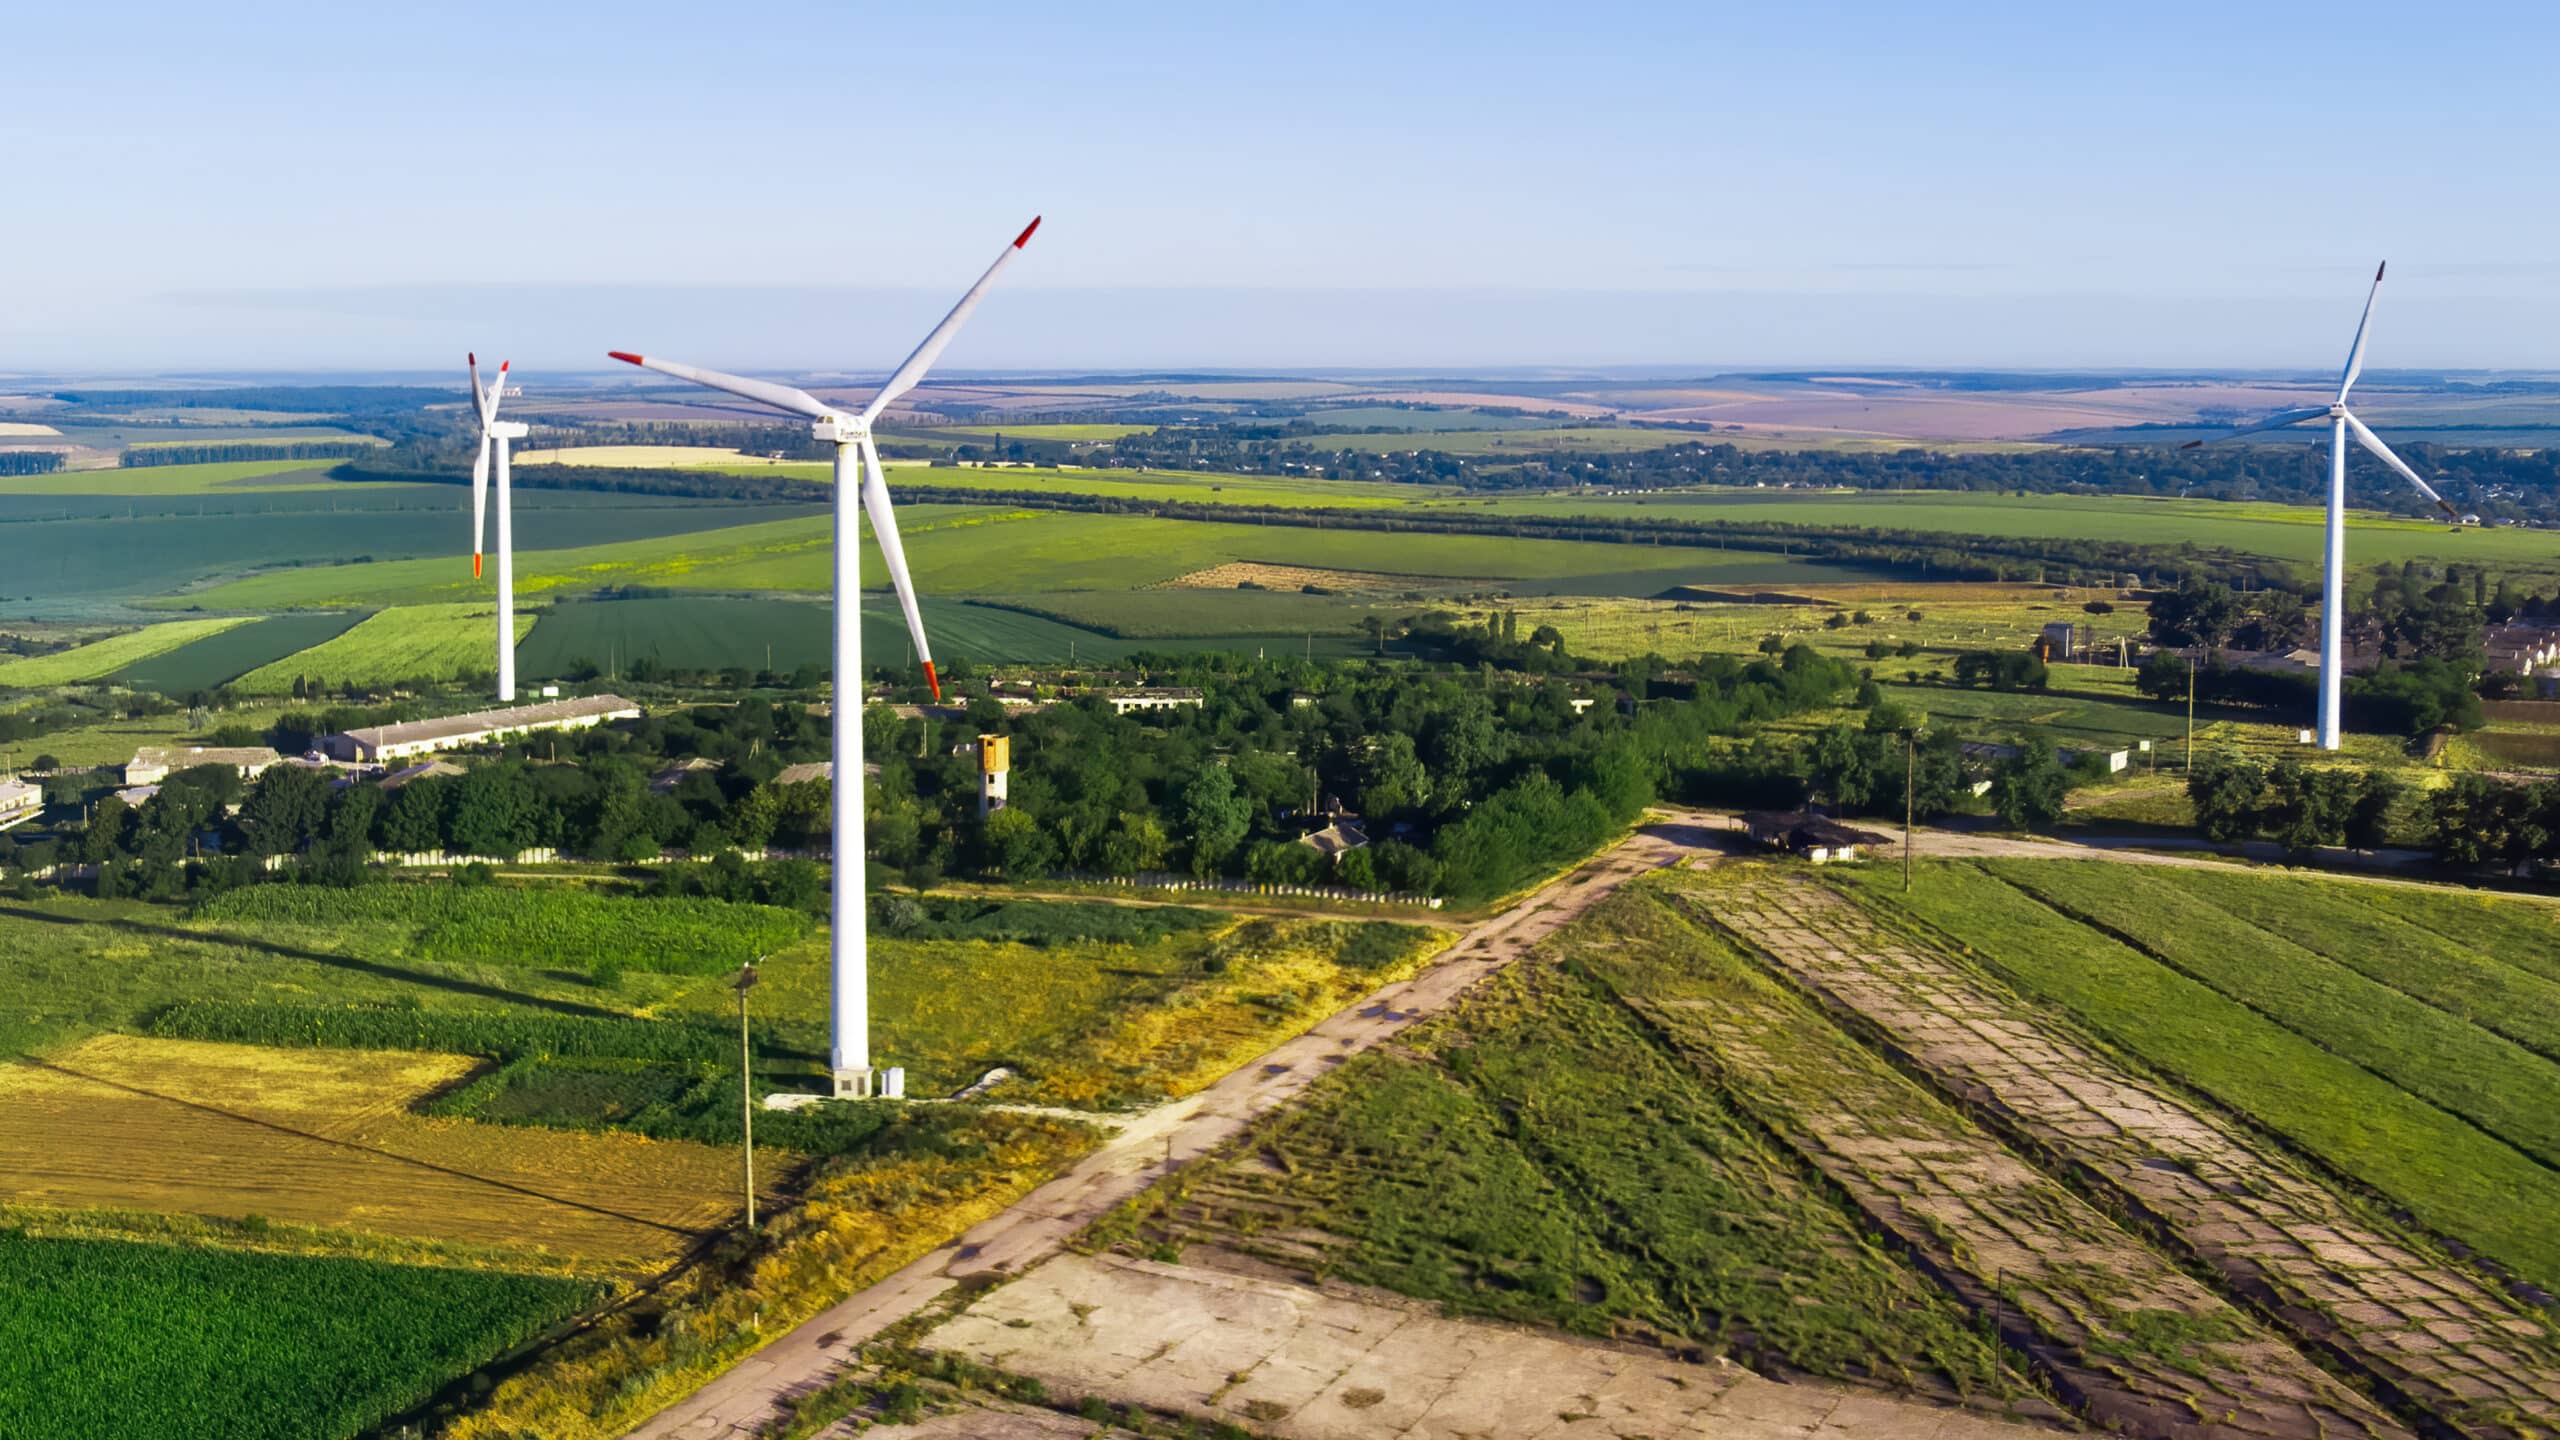 Three wind turbines located on a field near Donduseni, view from the drone in Moldova